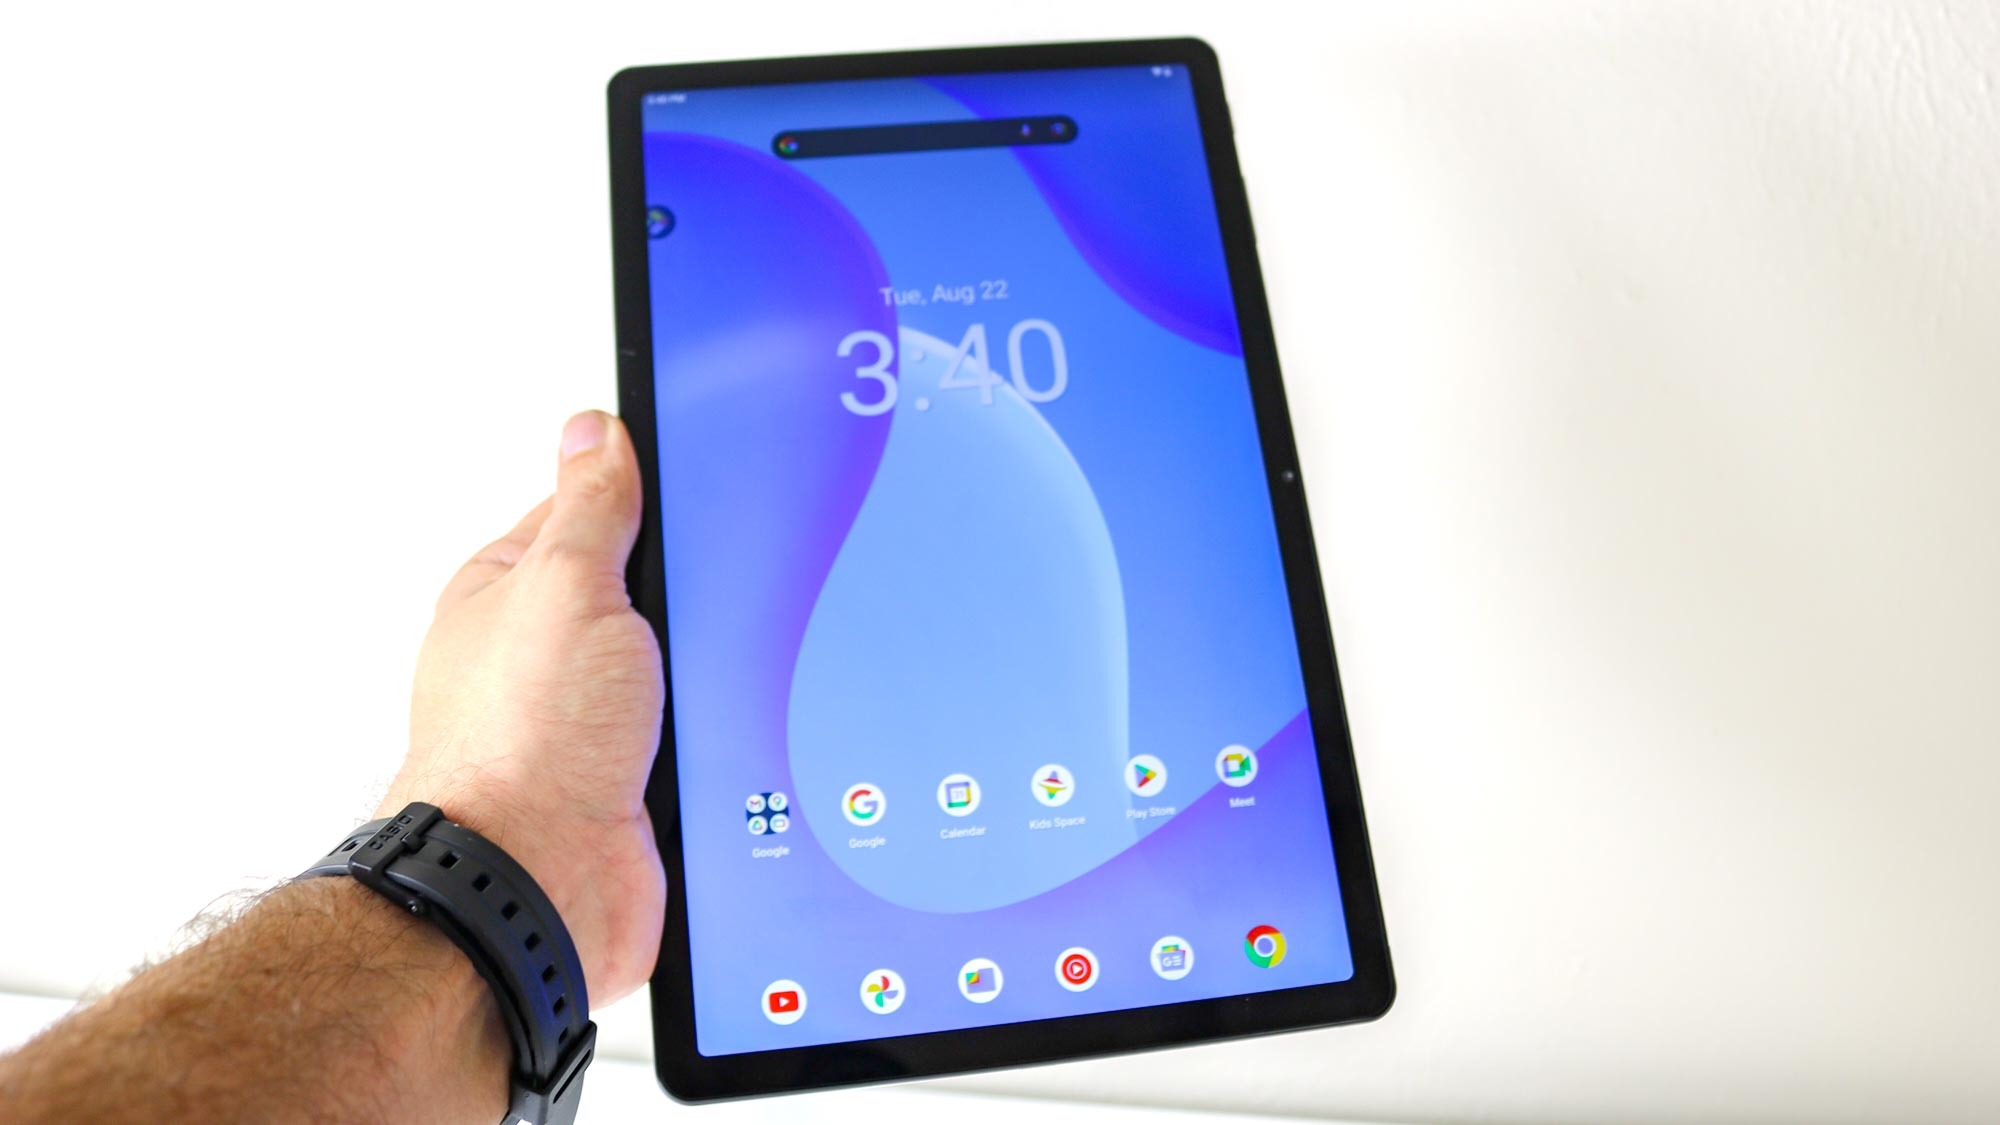 Fire Max 11 Tablet Review - Consumer Reports